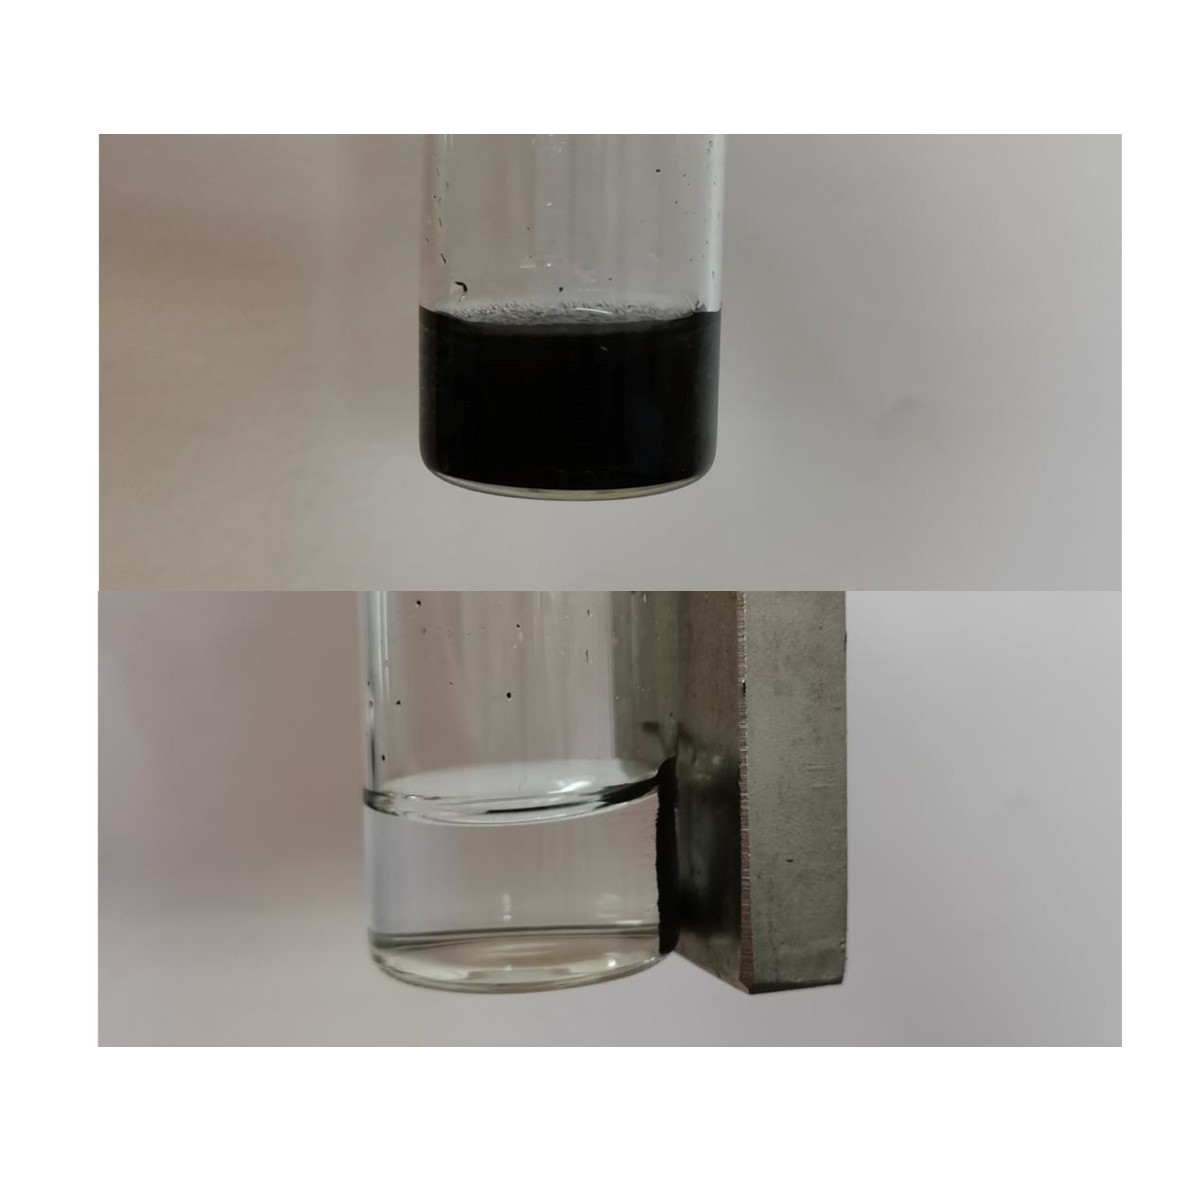 Nanoparticles (top image) efficiently break down pollutants and are magnetic, making them easily recoverable for reuse (bottom image). Adapted from ACS Applied Materials & Interfaces 2022, DOI: 10.1021/acsami.1c23466